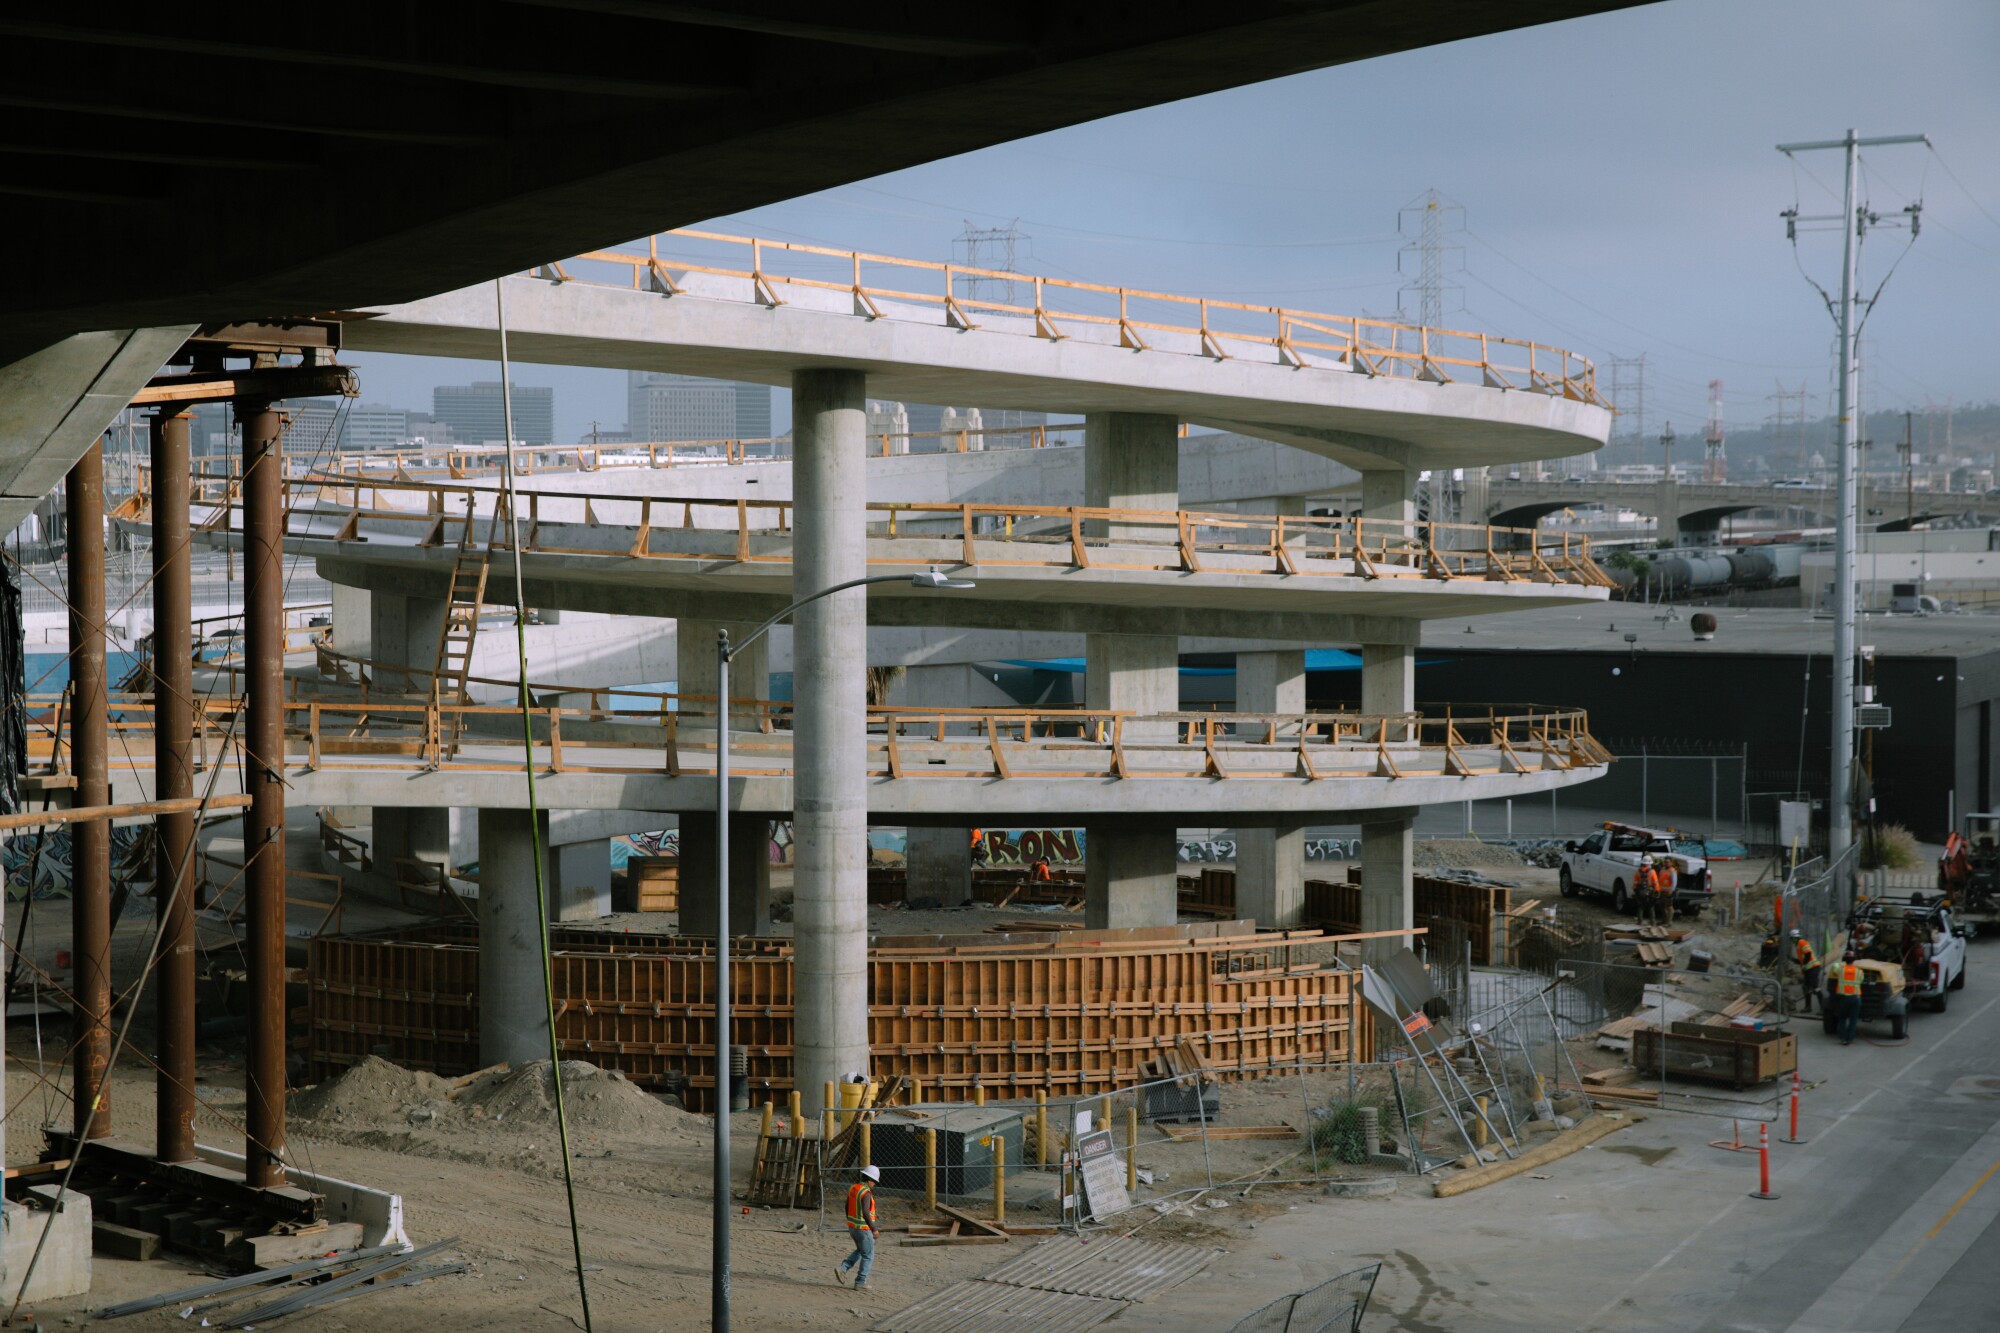 A side view of the spiral ramp attached to the 6th Street Viaduct nearing completion.